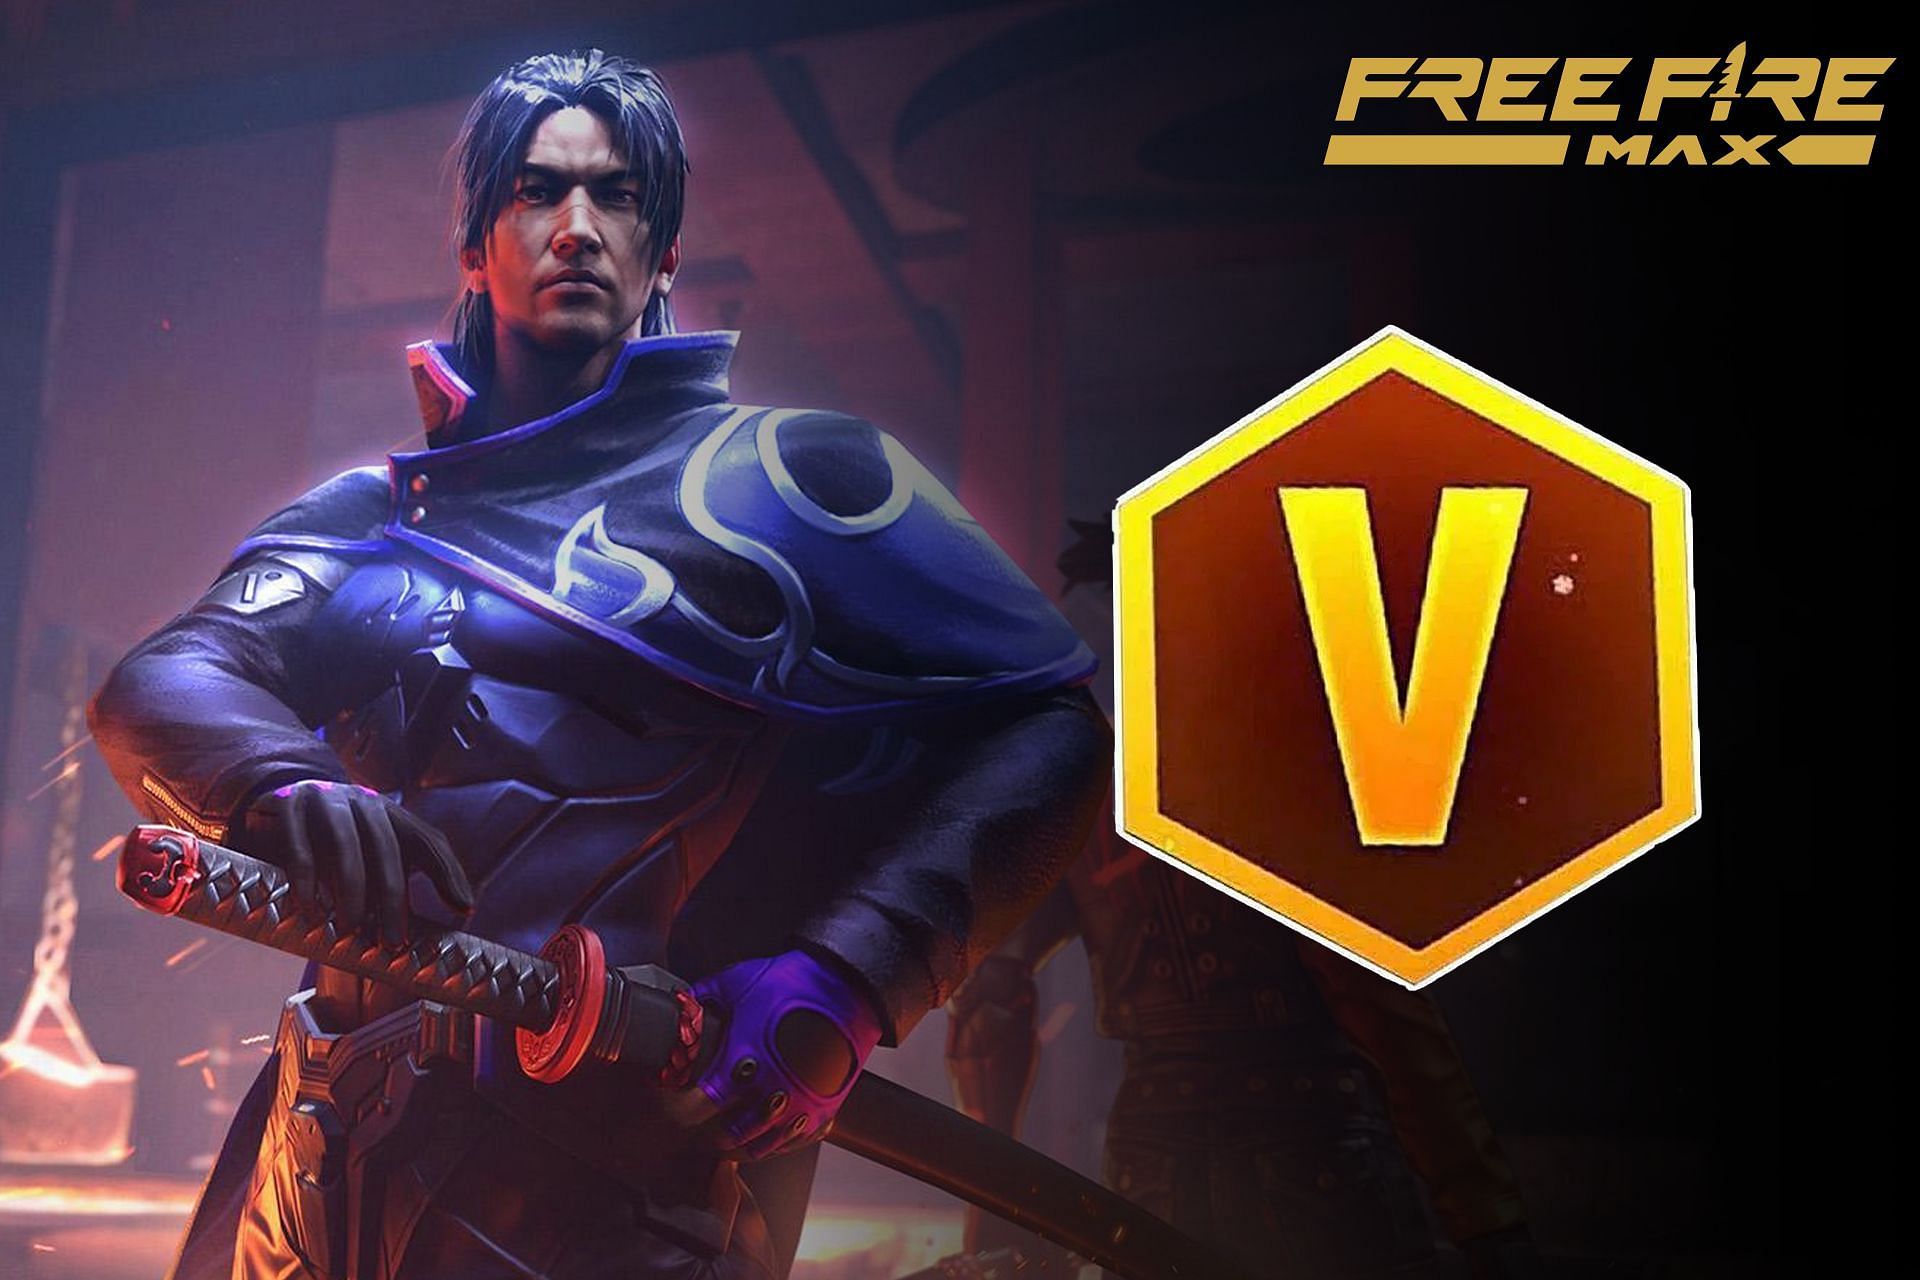 V Badge is one of the rarest things to have in Free Fire MAX (Image via Sportskeeda)